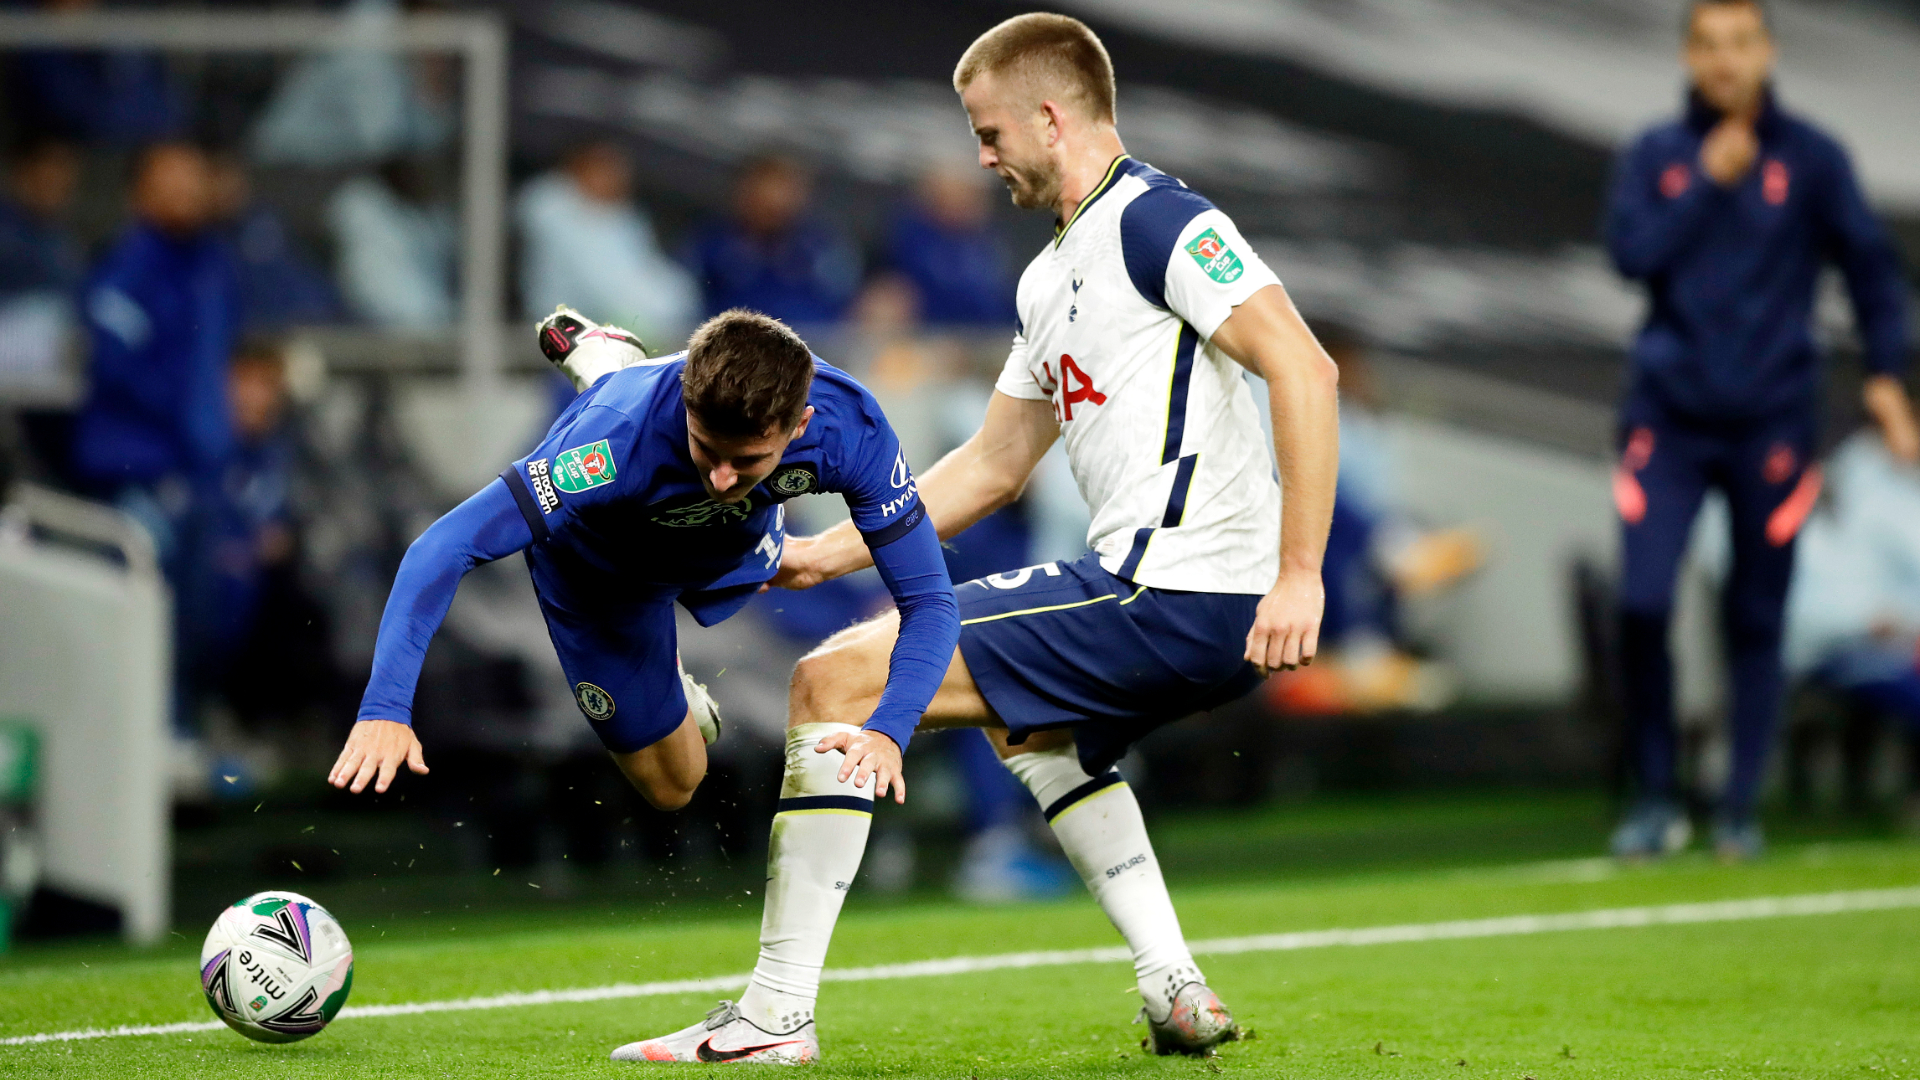 Eric Dier left the pitch during Tottenham's EFL Cup clash with Chelsea, but Jose Mourinho had no words of criticism.